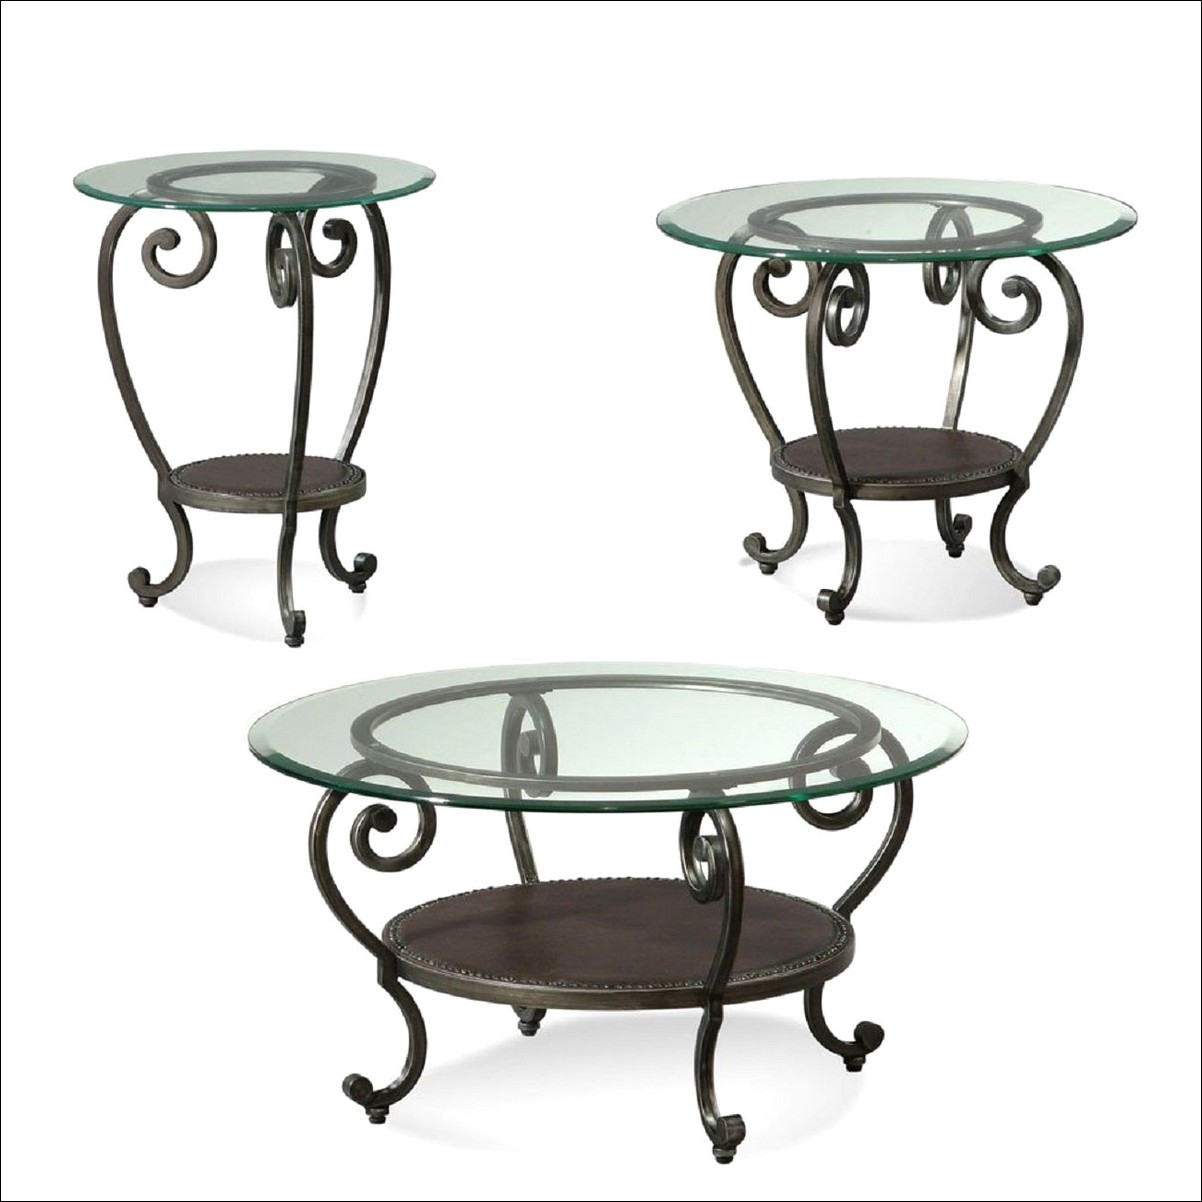 inch round decorator table cloth probably terrific cool wrought coffee accent tables iron end with glass tops footstool legs aluminum outdoor side ethan allen desk used charging